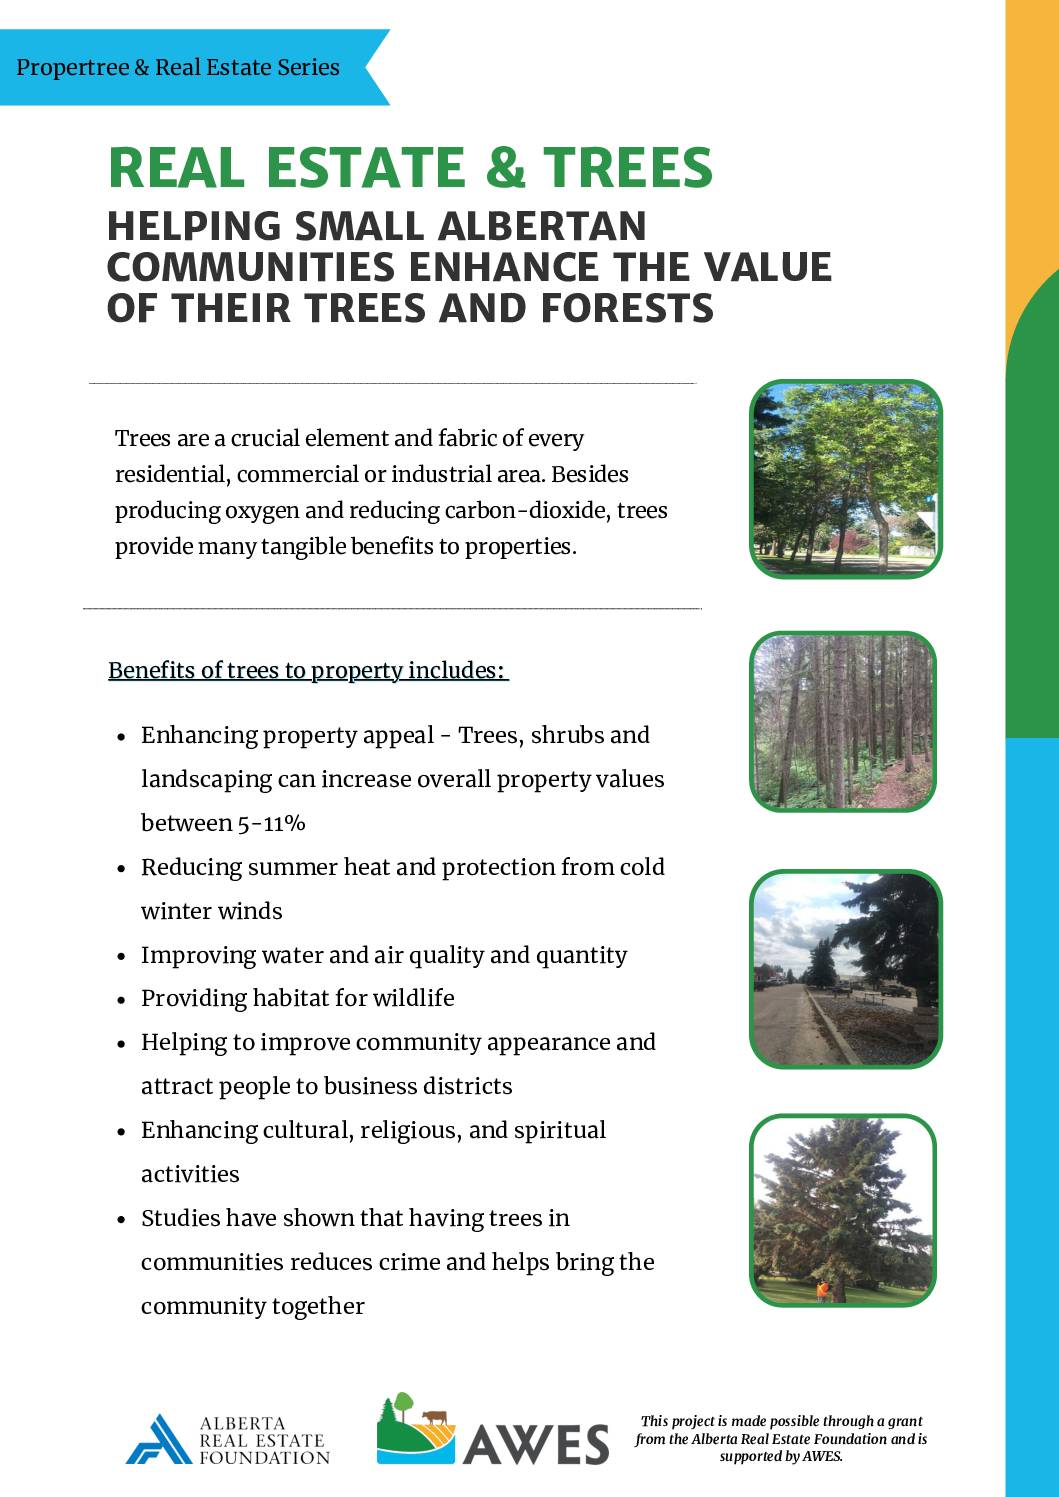 Real Estate & Trees: Helping Small Albertan Communities Enhance the Value of their Trees and Forests